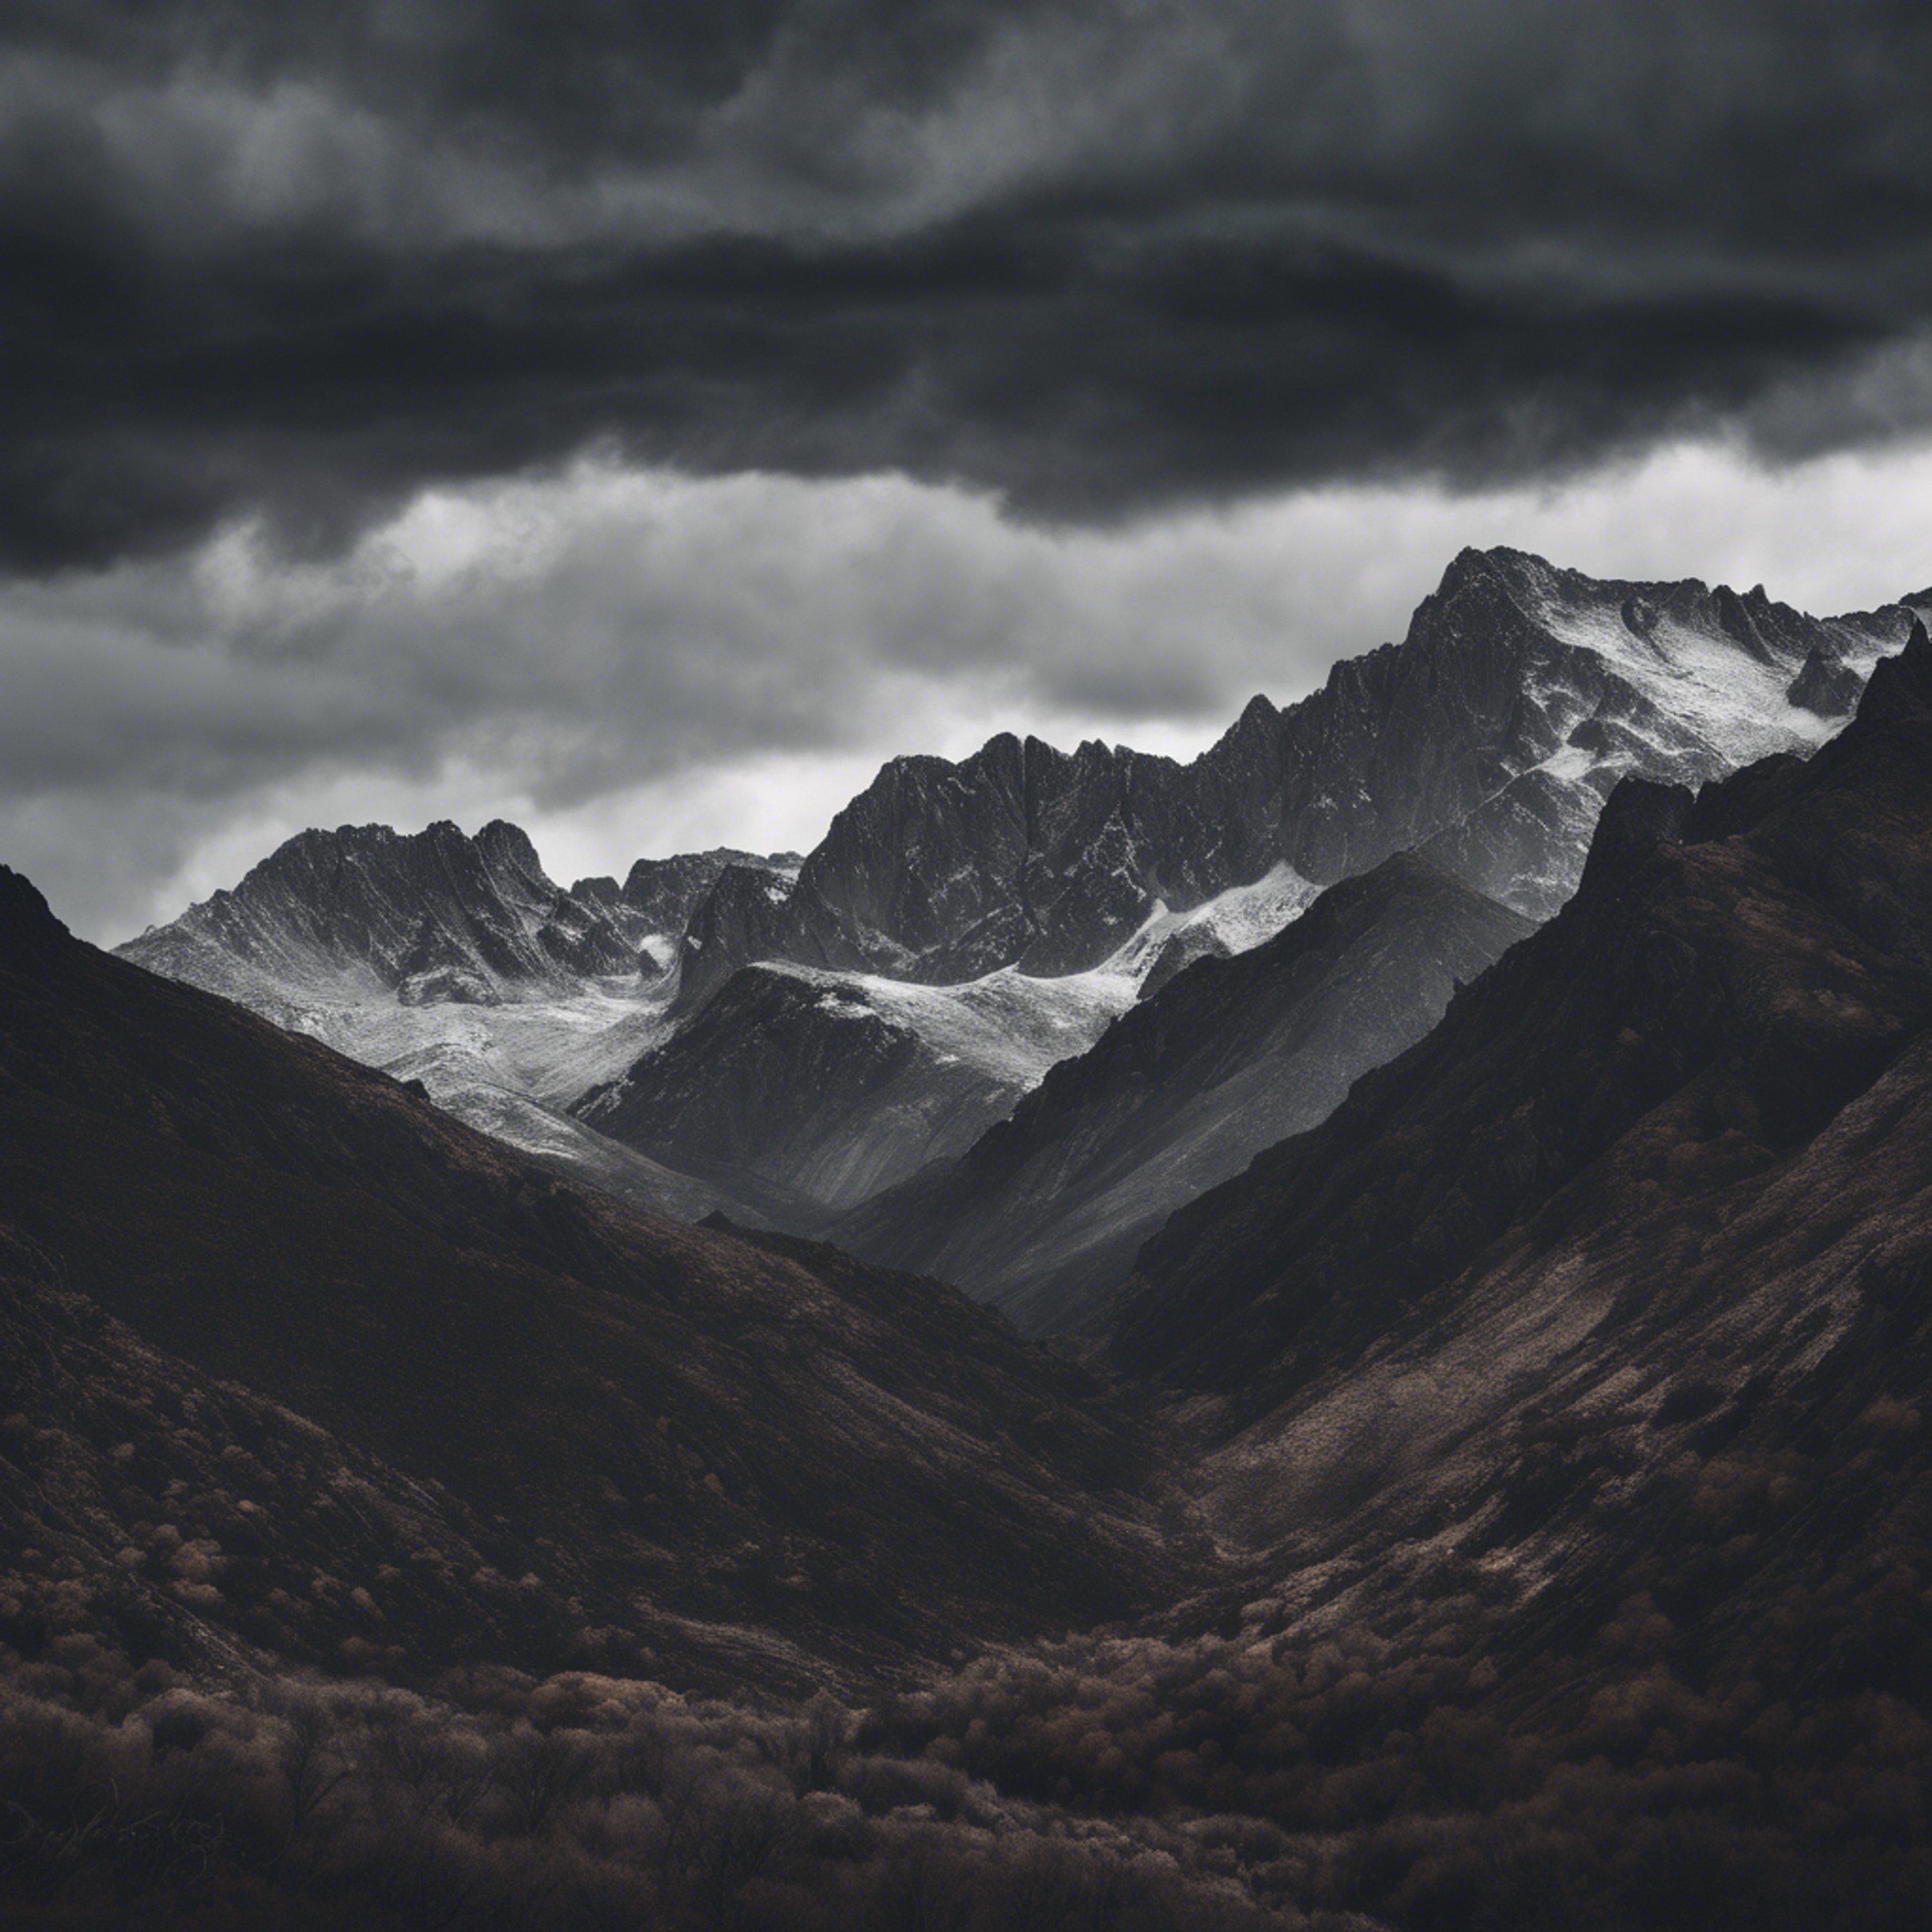 A rugged black and gray mountain range under a stormy skies. Wallpaper[bbf48e9891544a6fb579]